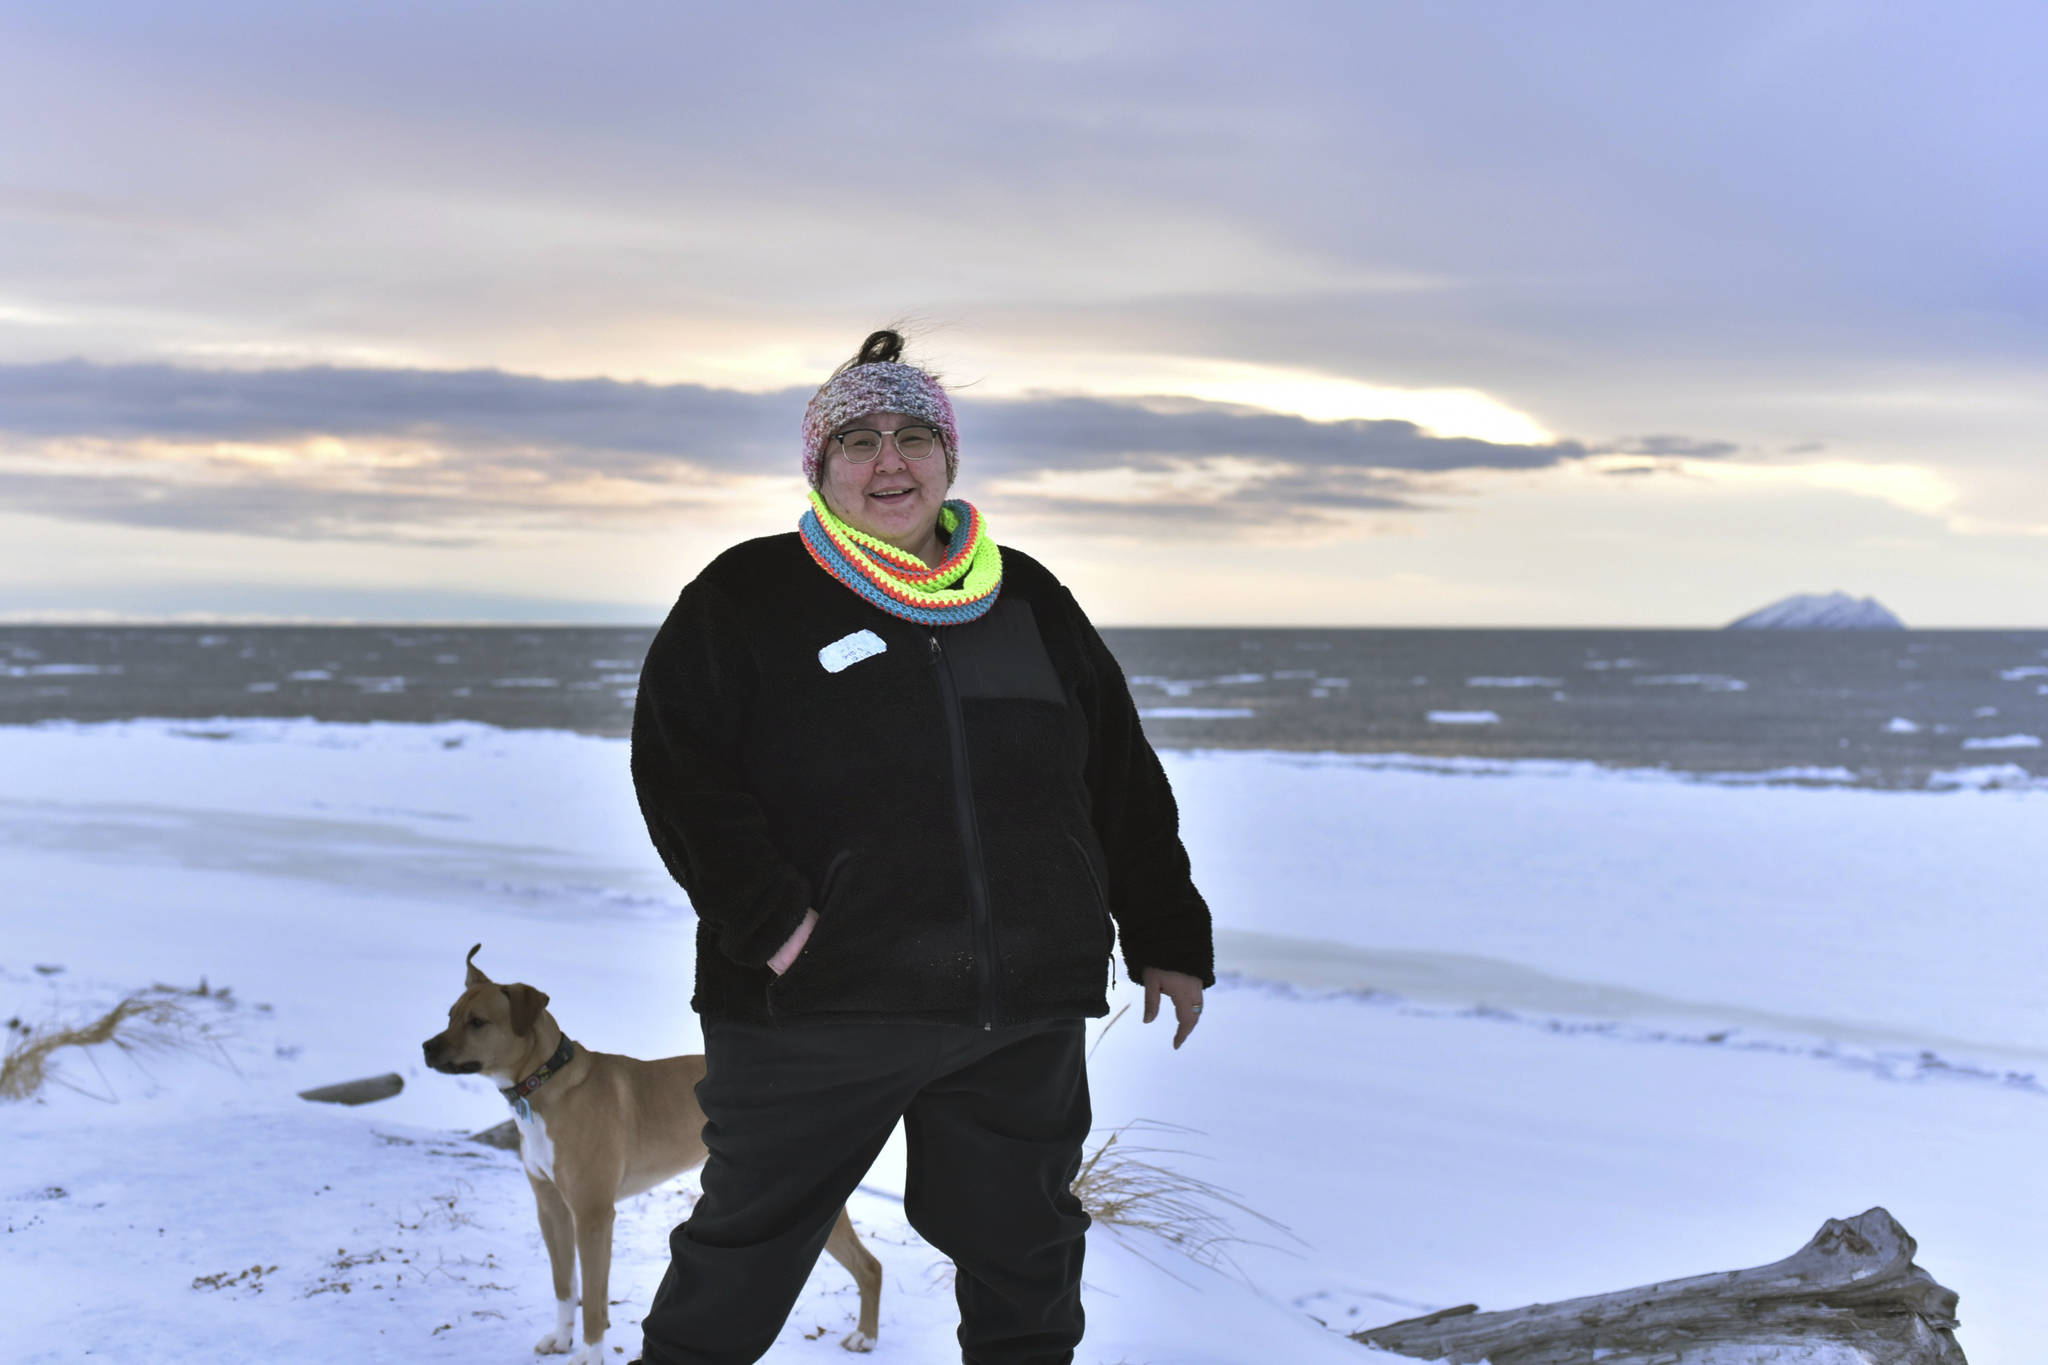 In this Jan. 14 photo, Clarice “Bun” Hardy stands on the beach with her dog, Marley, in the Native Village of Shaktoolik. Hardy, a former 911 dispatcher for the Nome Police Department, says she moved back to her village after a sexual assault left her feeling unsafe in Nome. (AP Photo | Victoria Mckenzie)